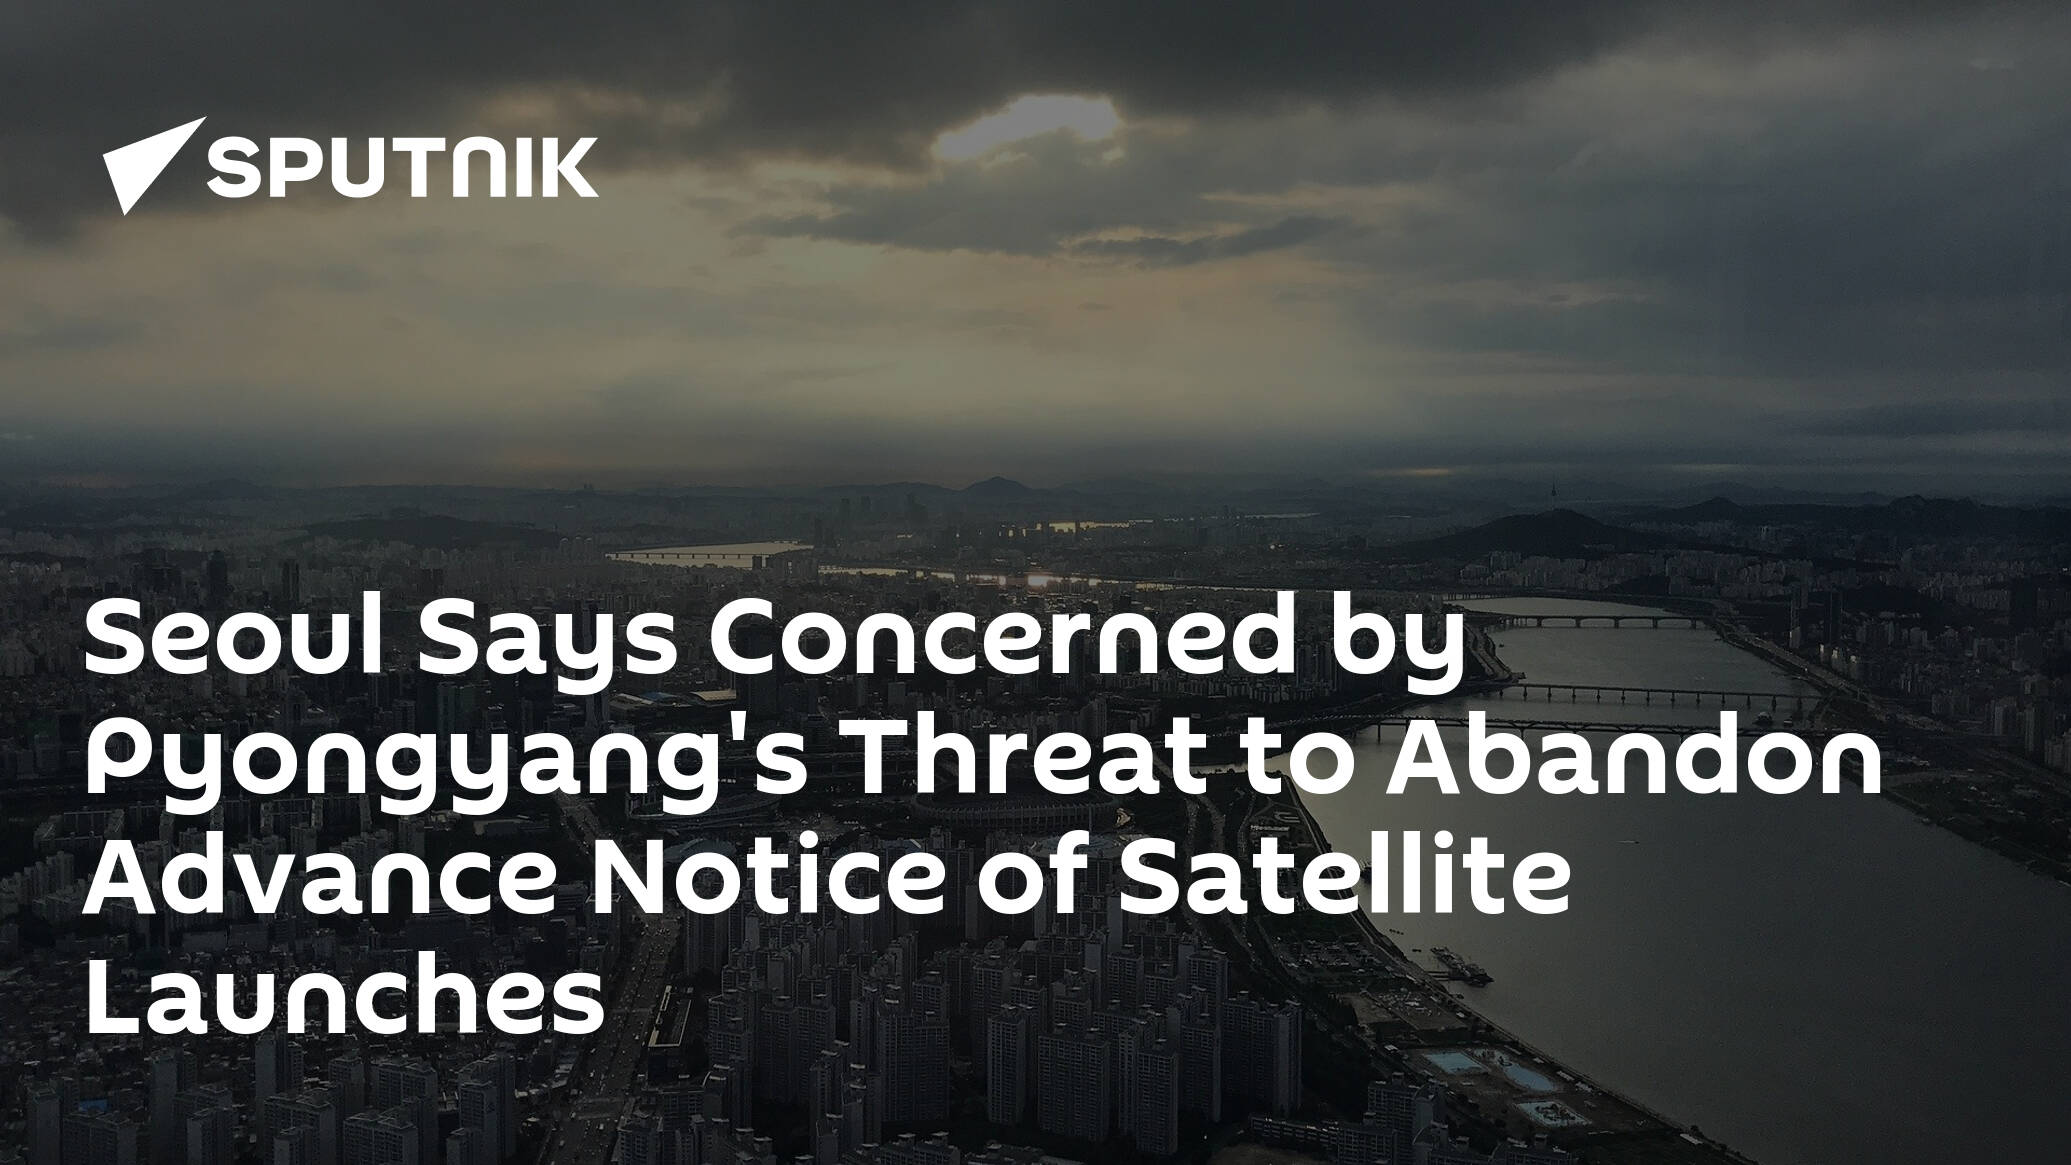 Seoul Says Concerned by Pyongyang's Threat to Abandon Advance Notice of Satellite Launches